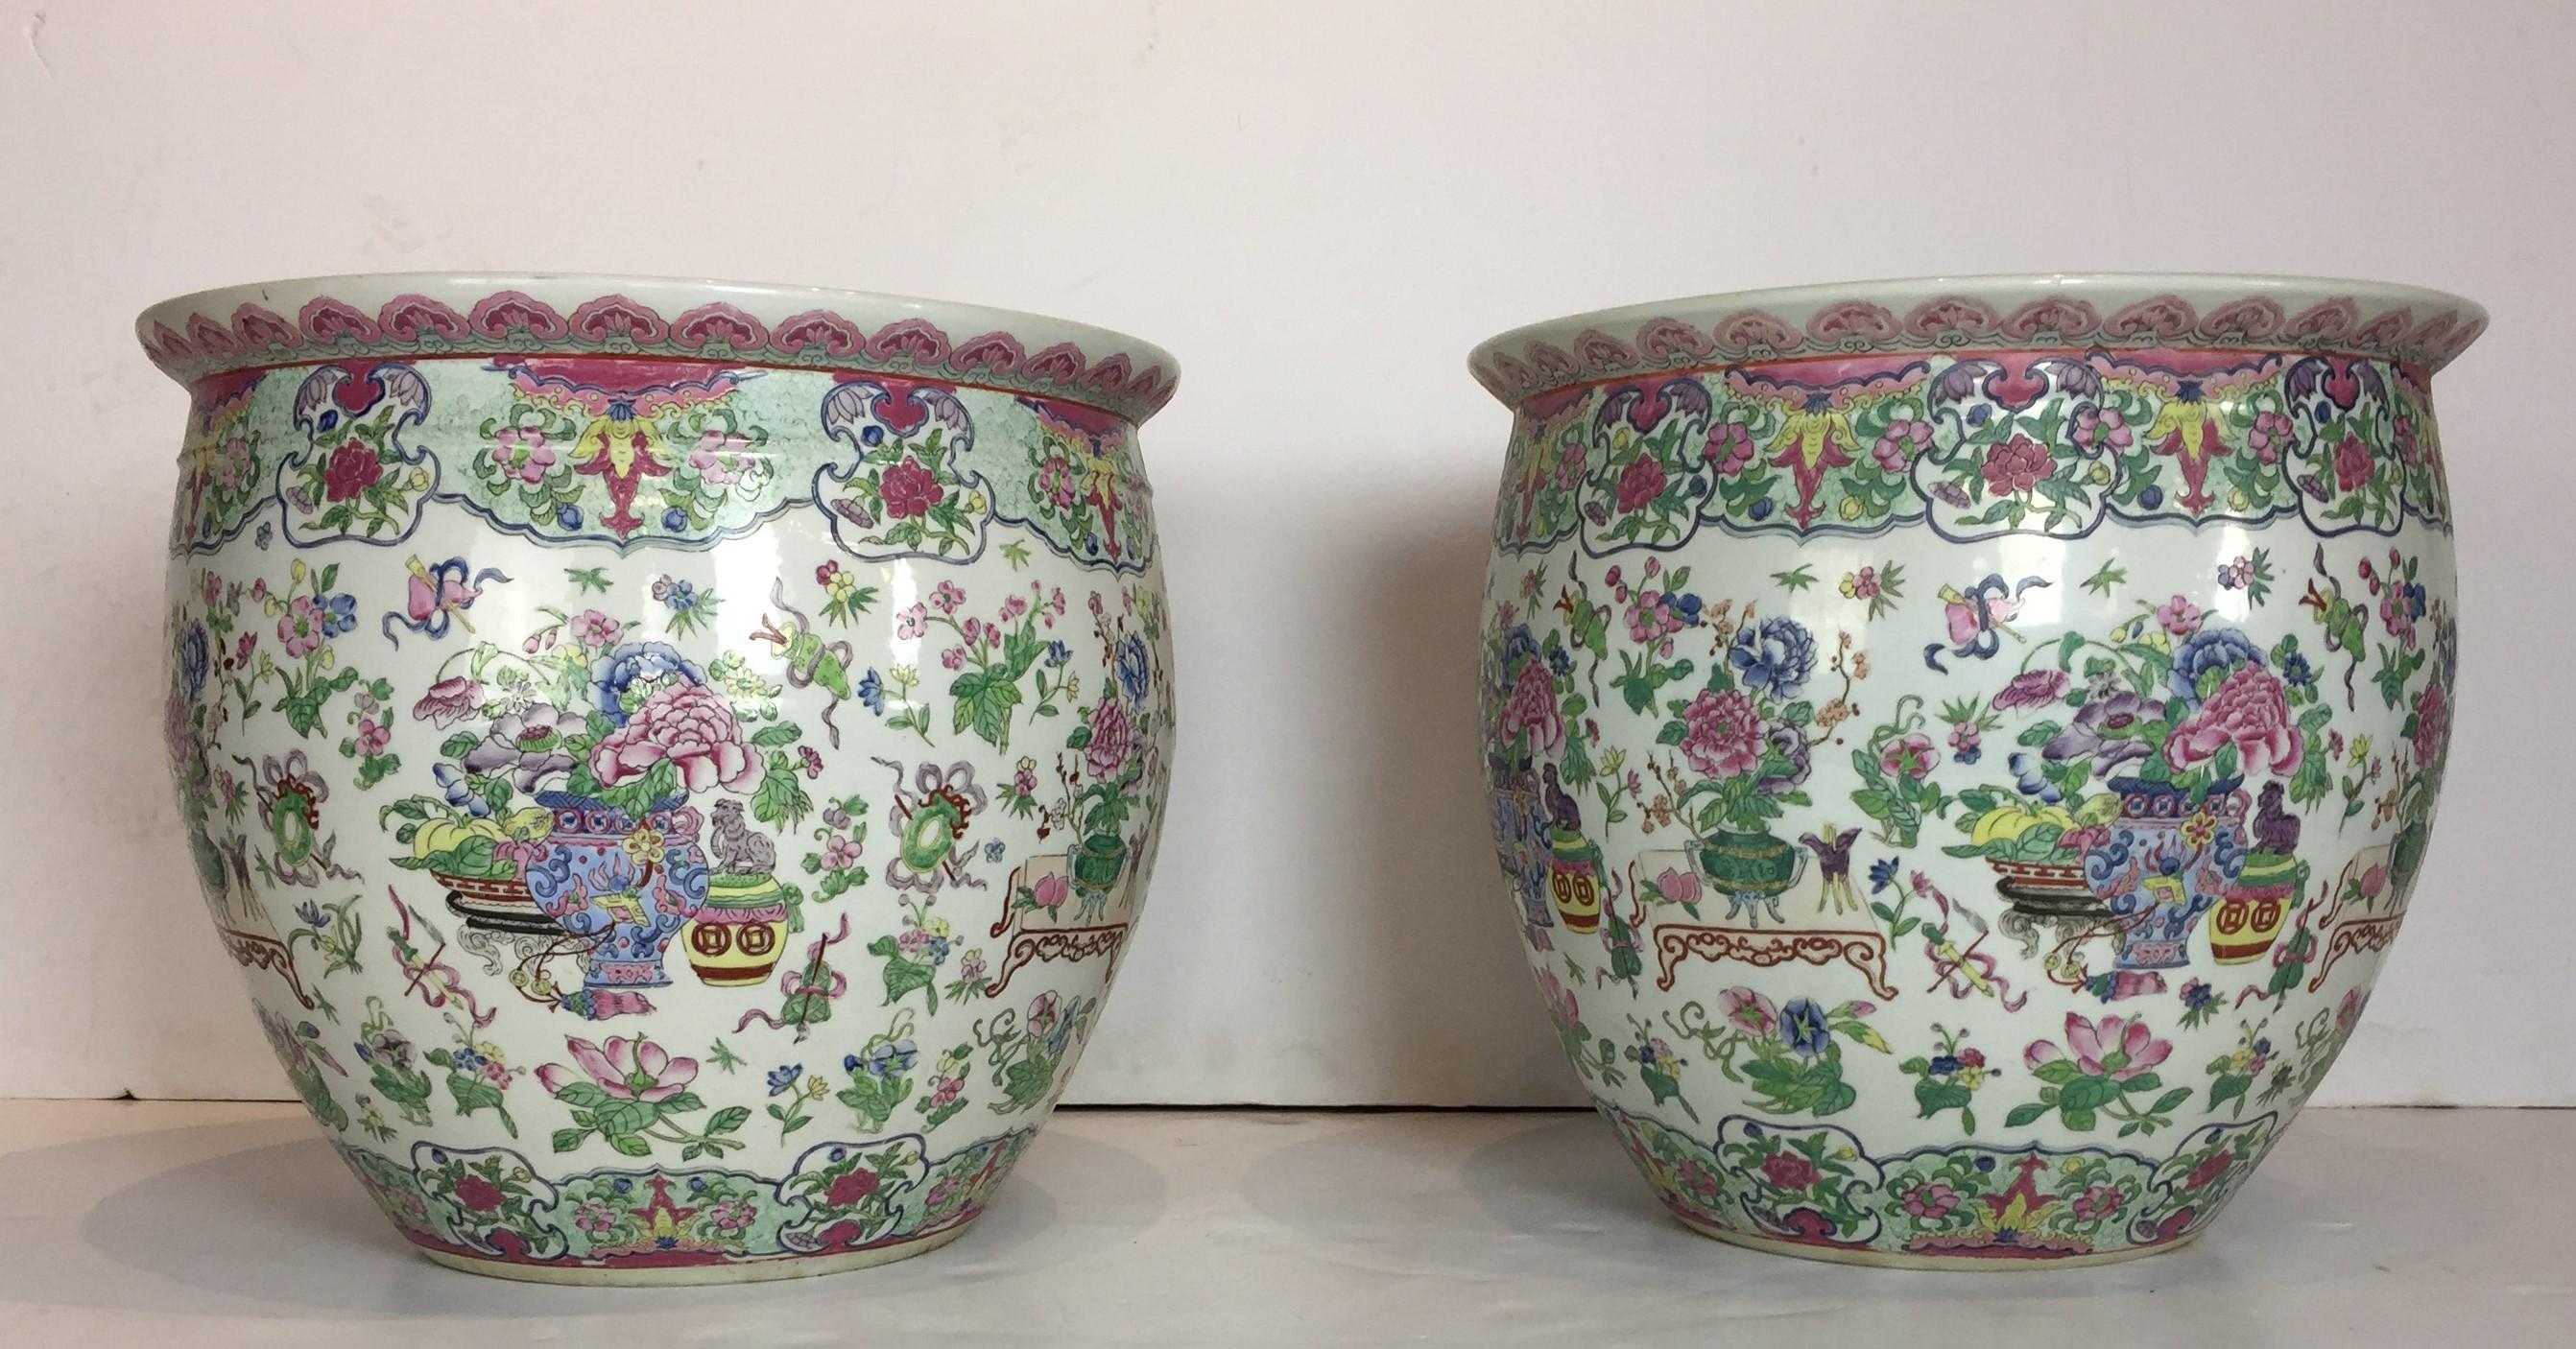 Pair of large size hand painted Chinese planters.